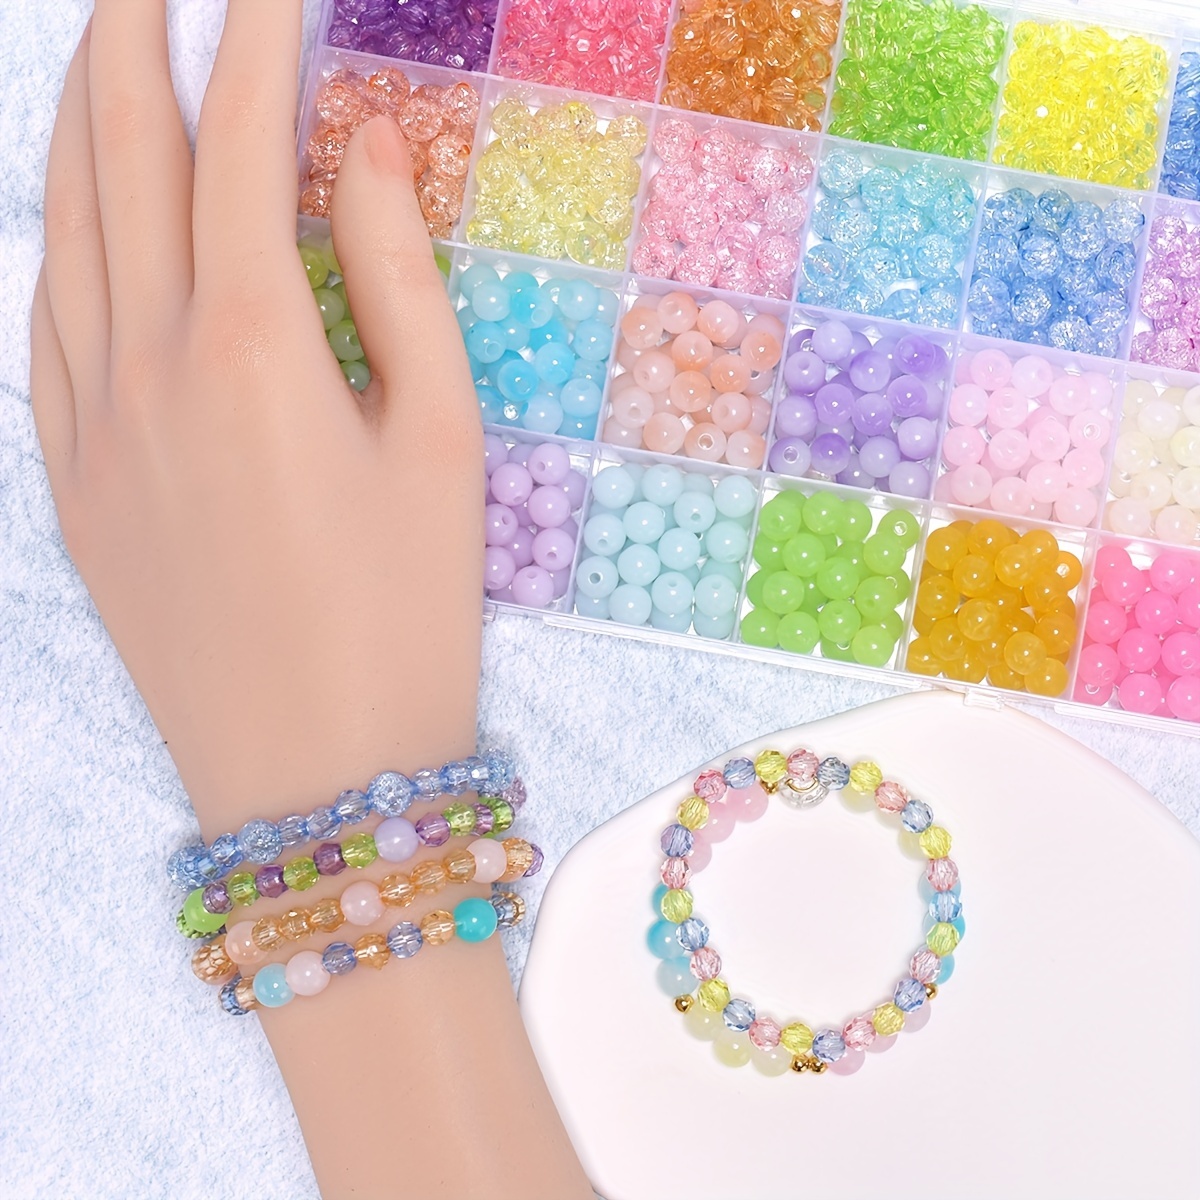 DIY Colorful Beads Bracelet Making Kit for Girls Birthday Gift, 8mm Acrylic  Transparent Bead in Bead Beads for Mobile Phone Chain Jewelry Making Kit